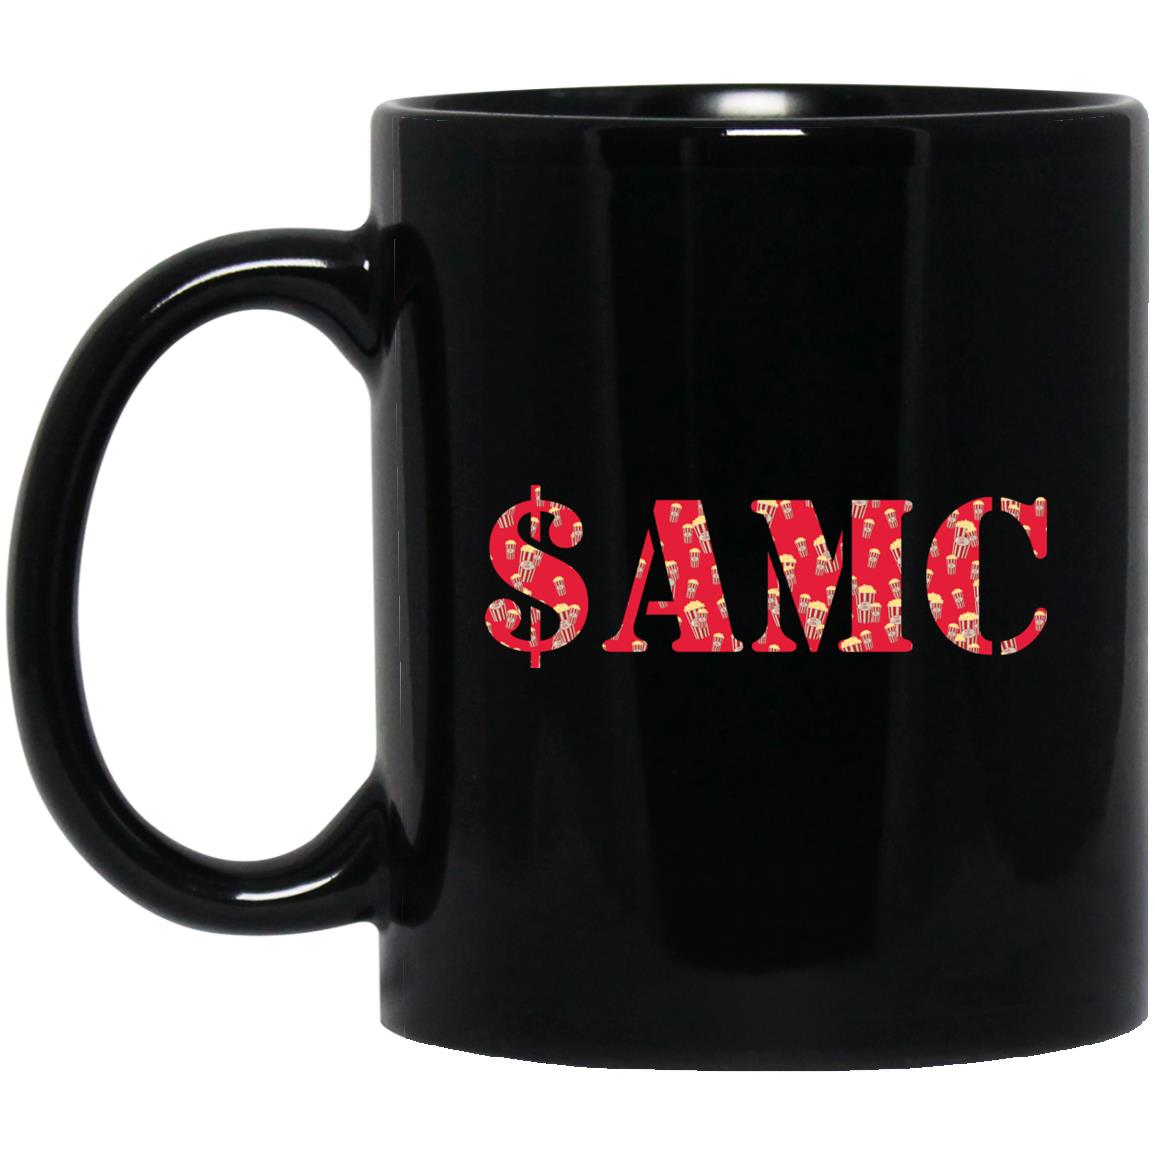 $AMC - Cups Mugs Black, White & Color-Changing